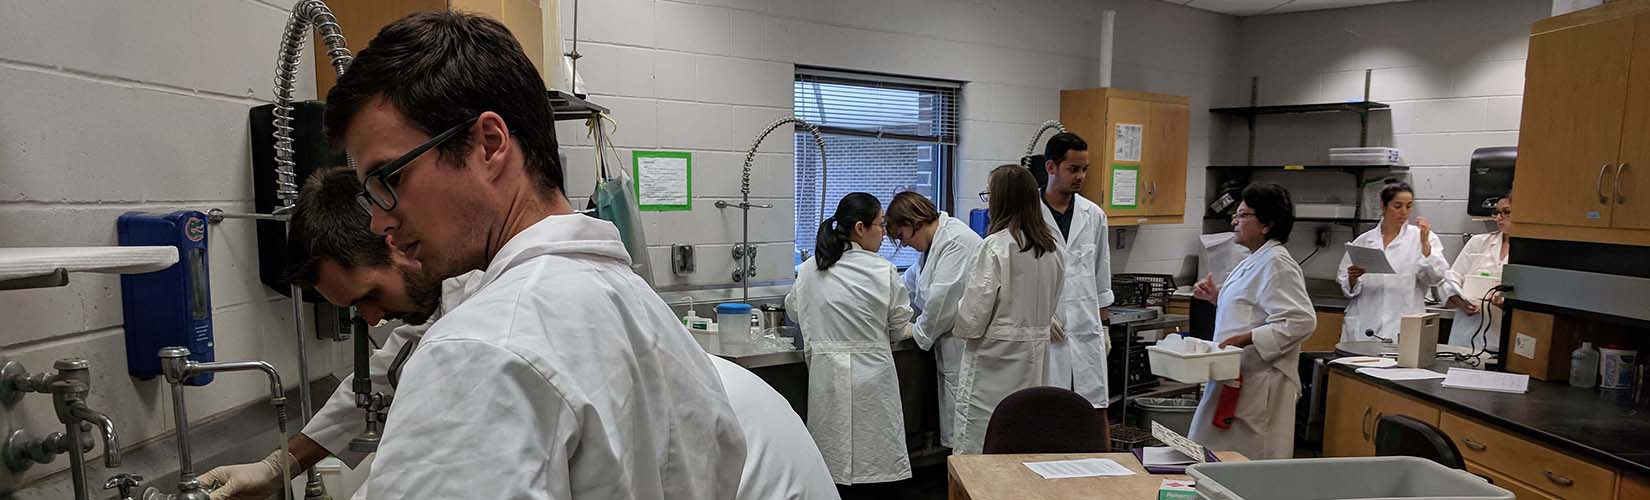 students and faculty working in the laboratory